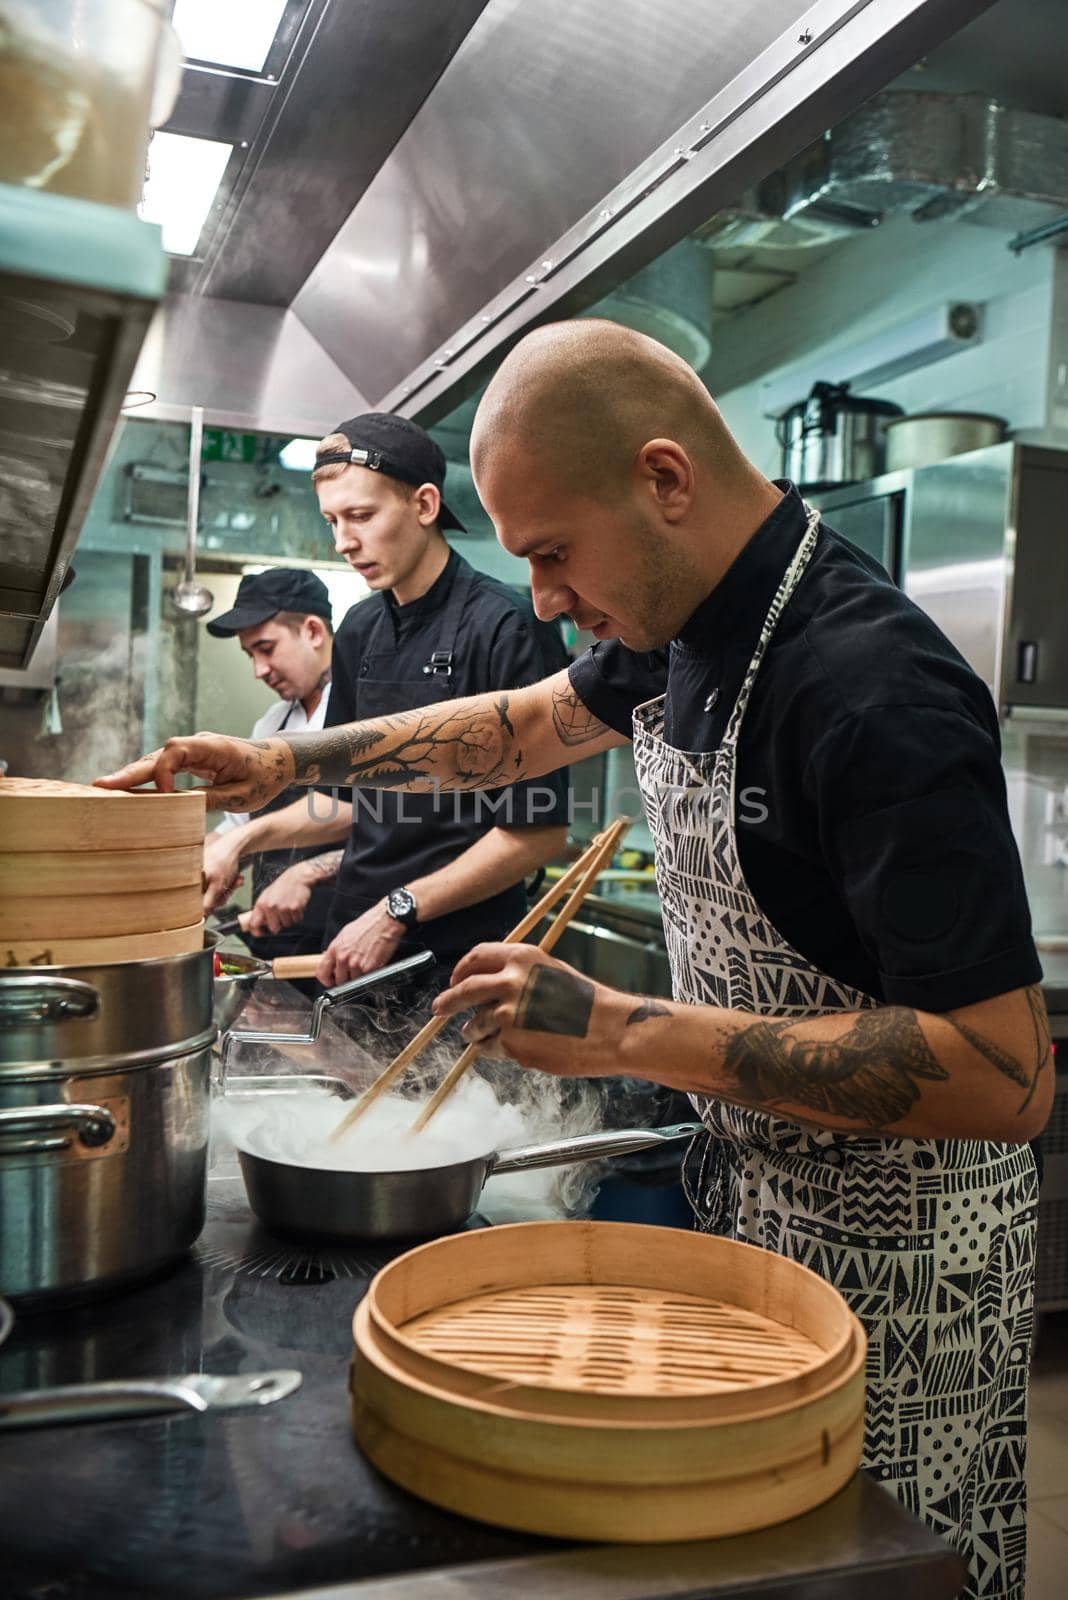 Full concentration. Young bald chef in apron with tattoos on his arms preparing dish with his two assistants in a restaurant kitchen. Cooking process